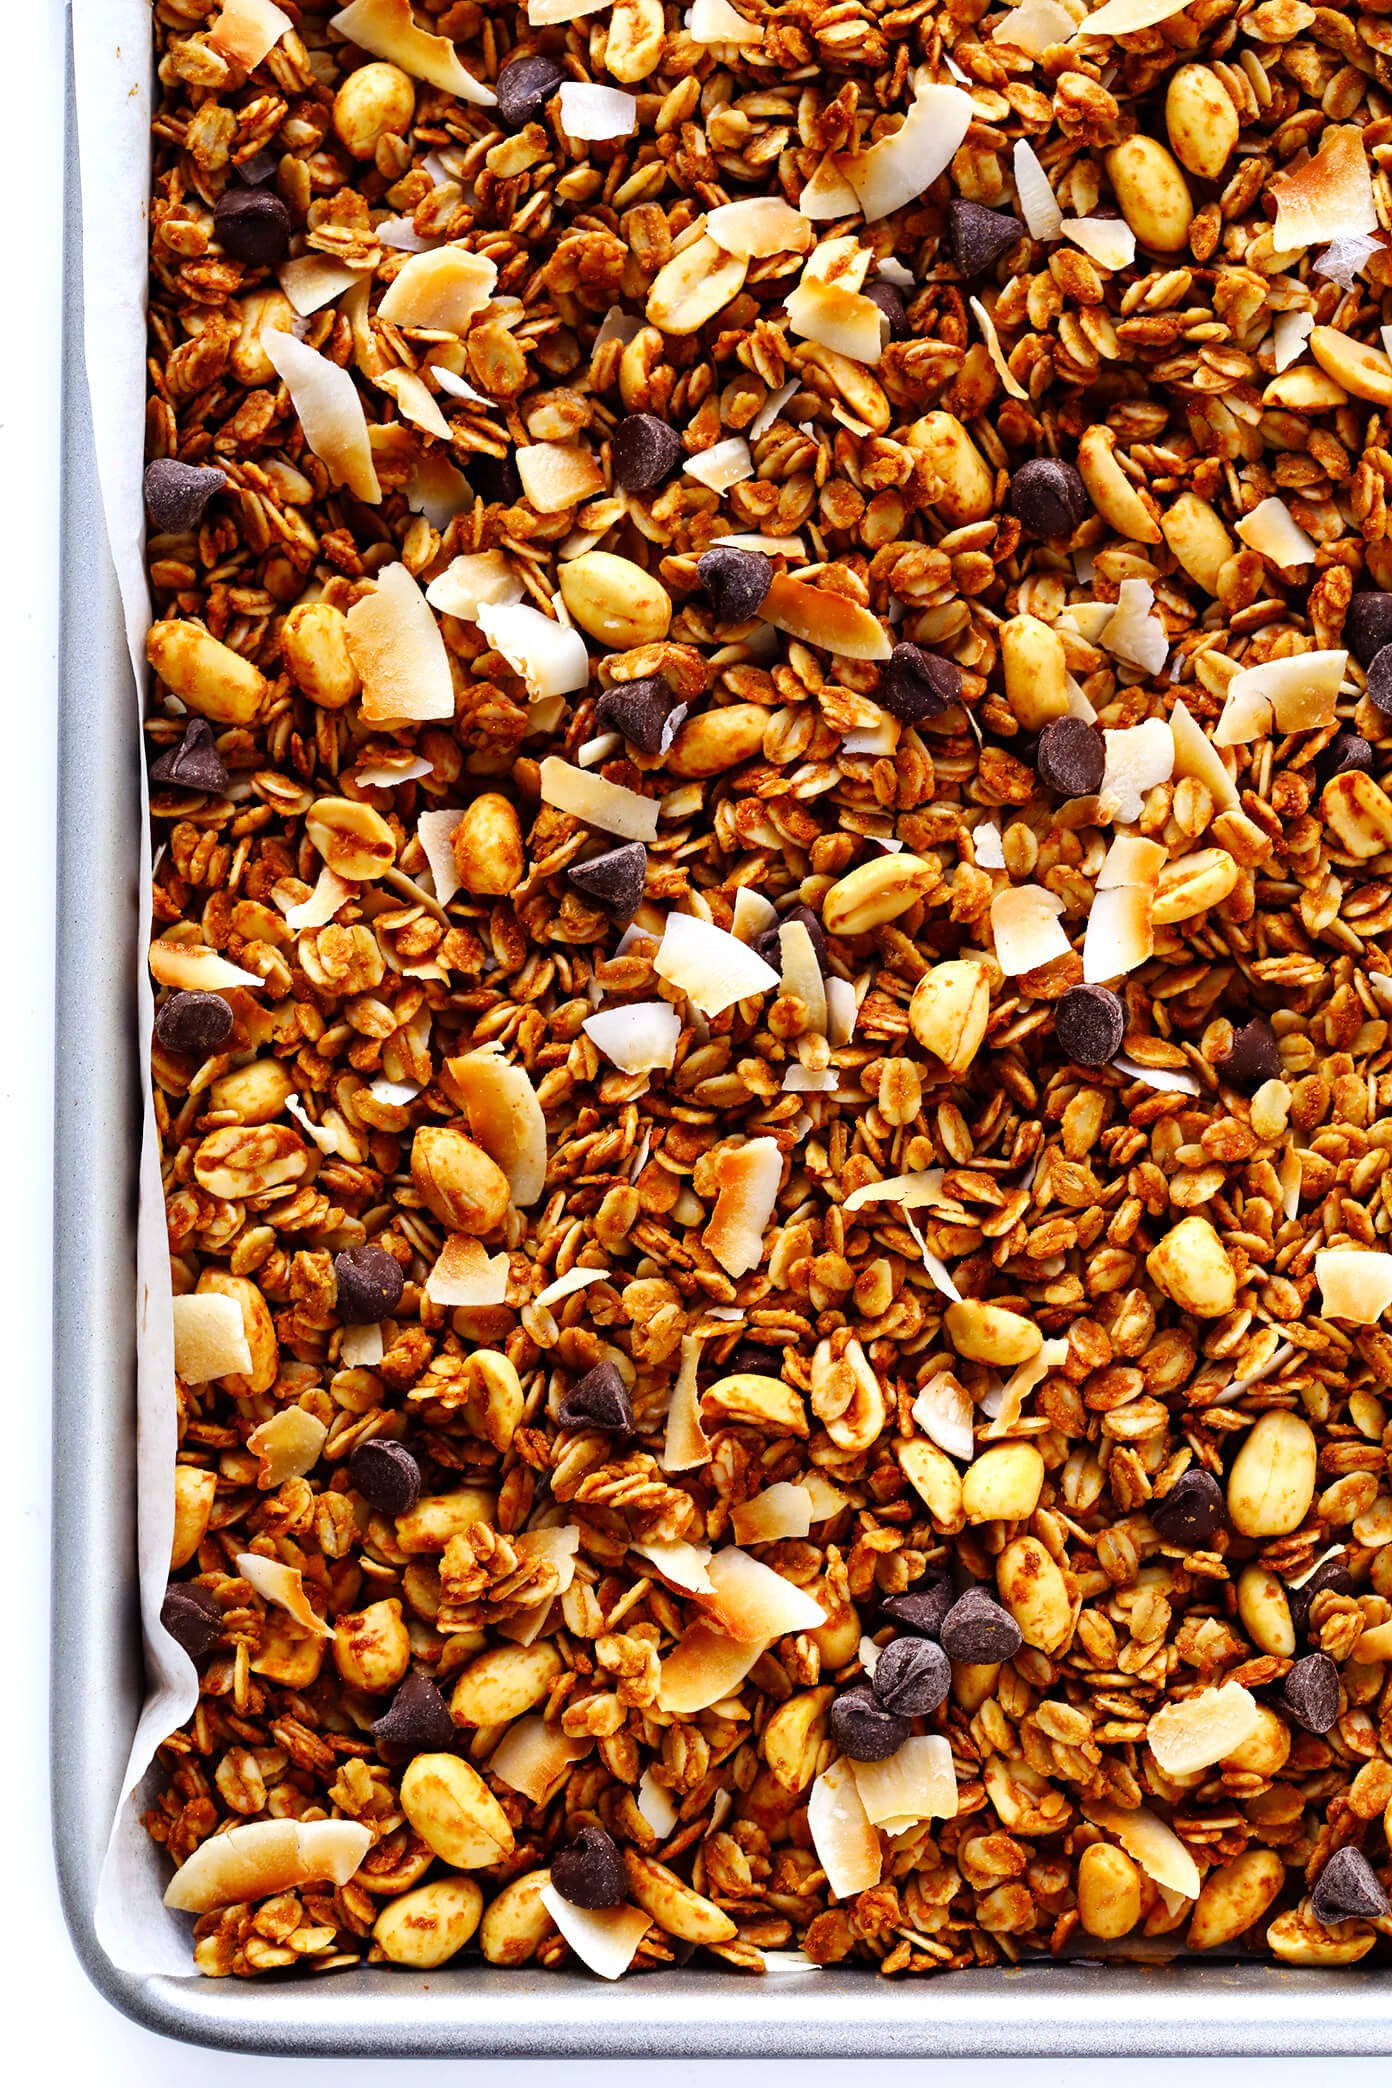 Peanut Butter Granola with Chocolate Chips